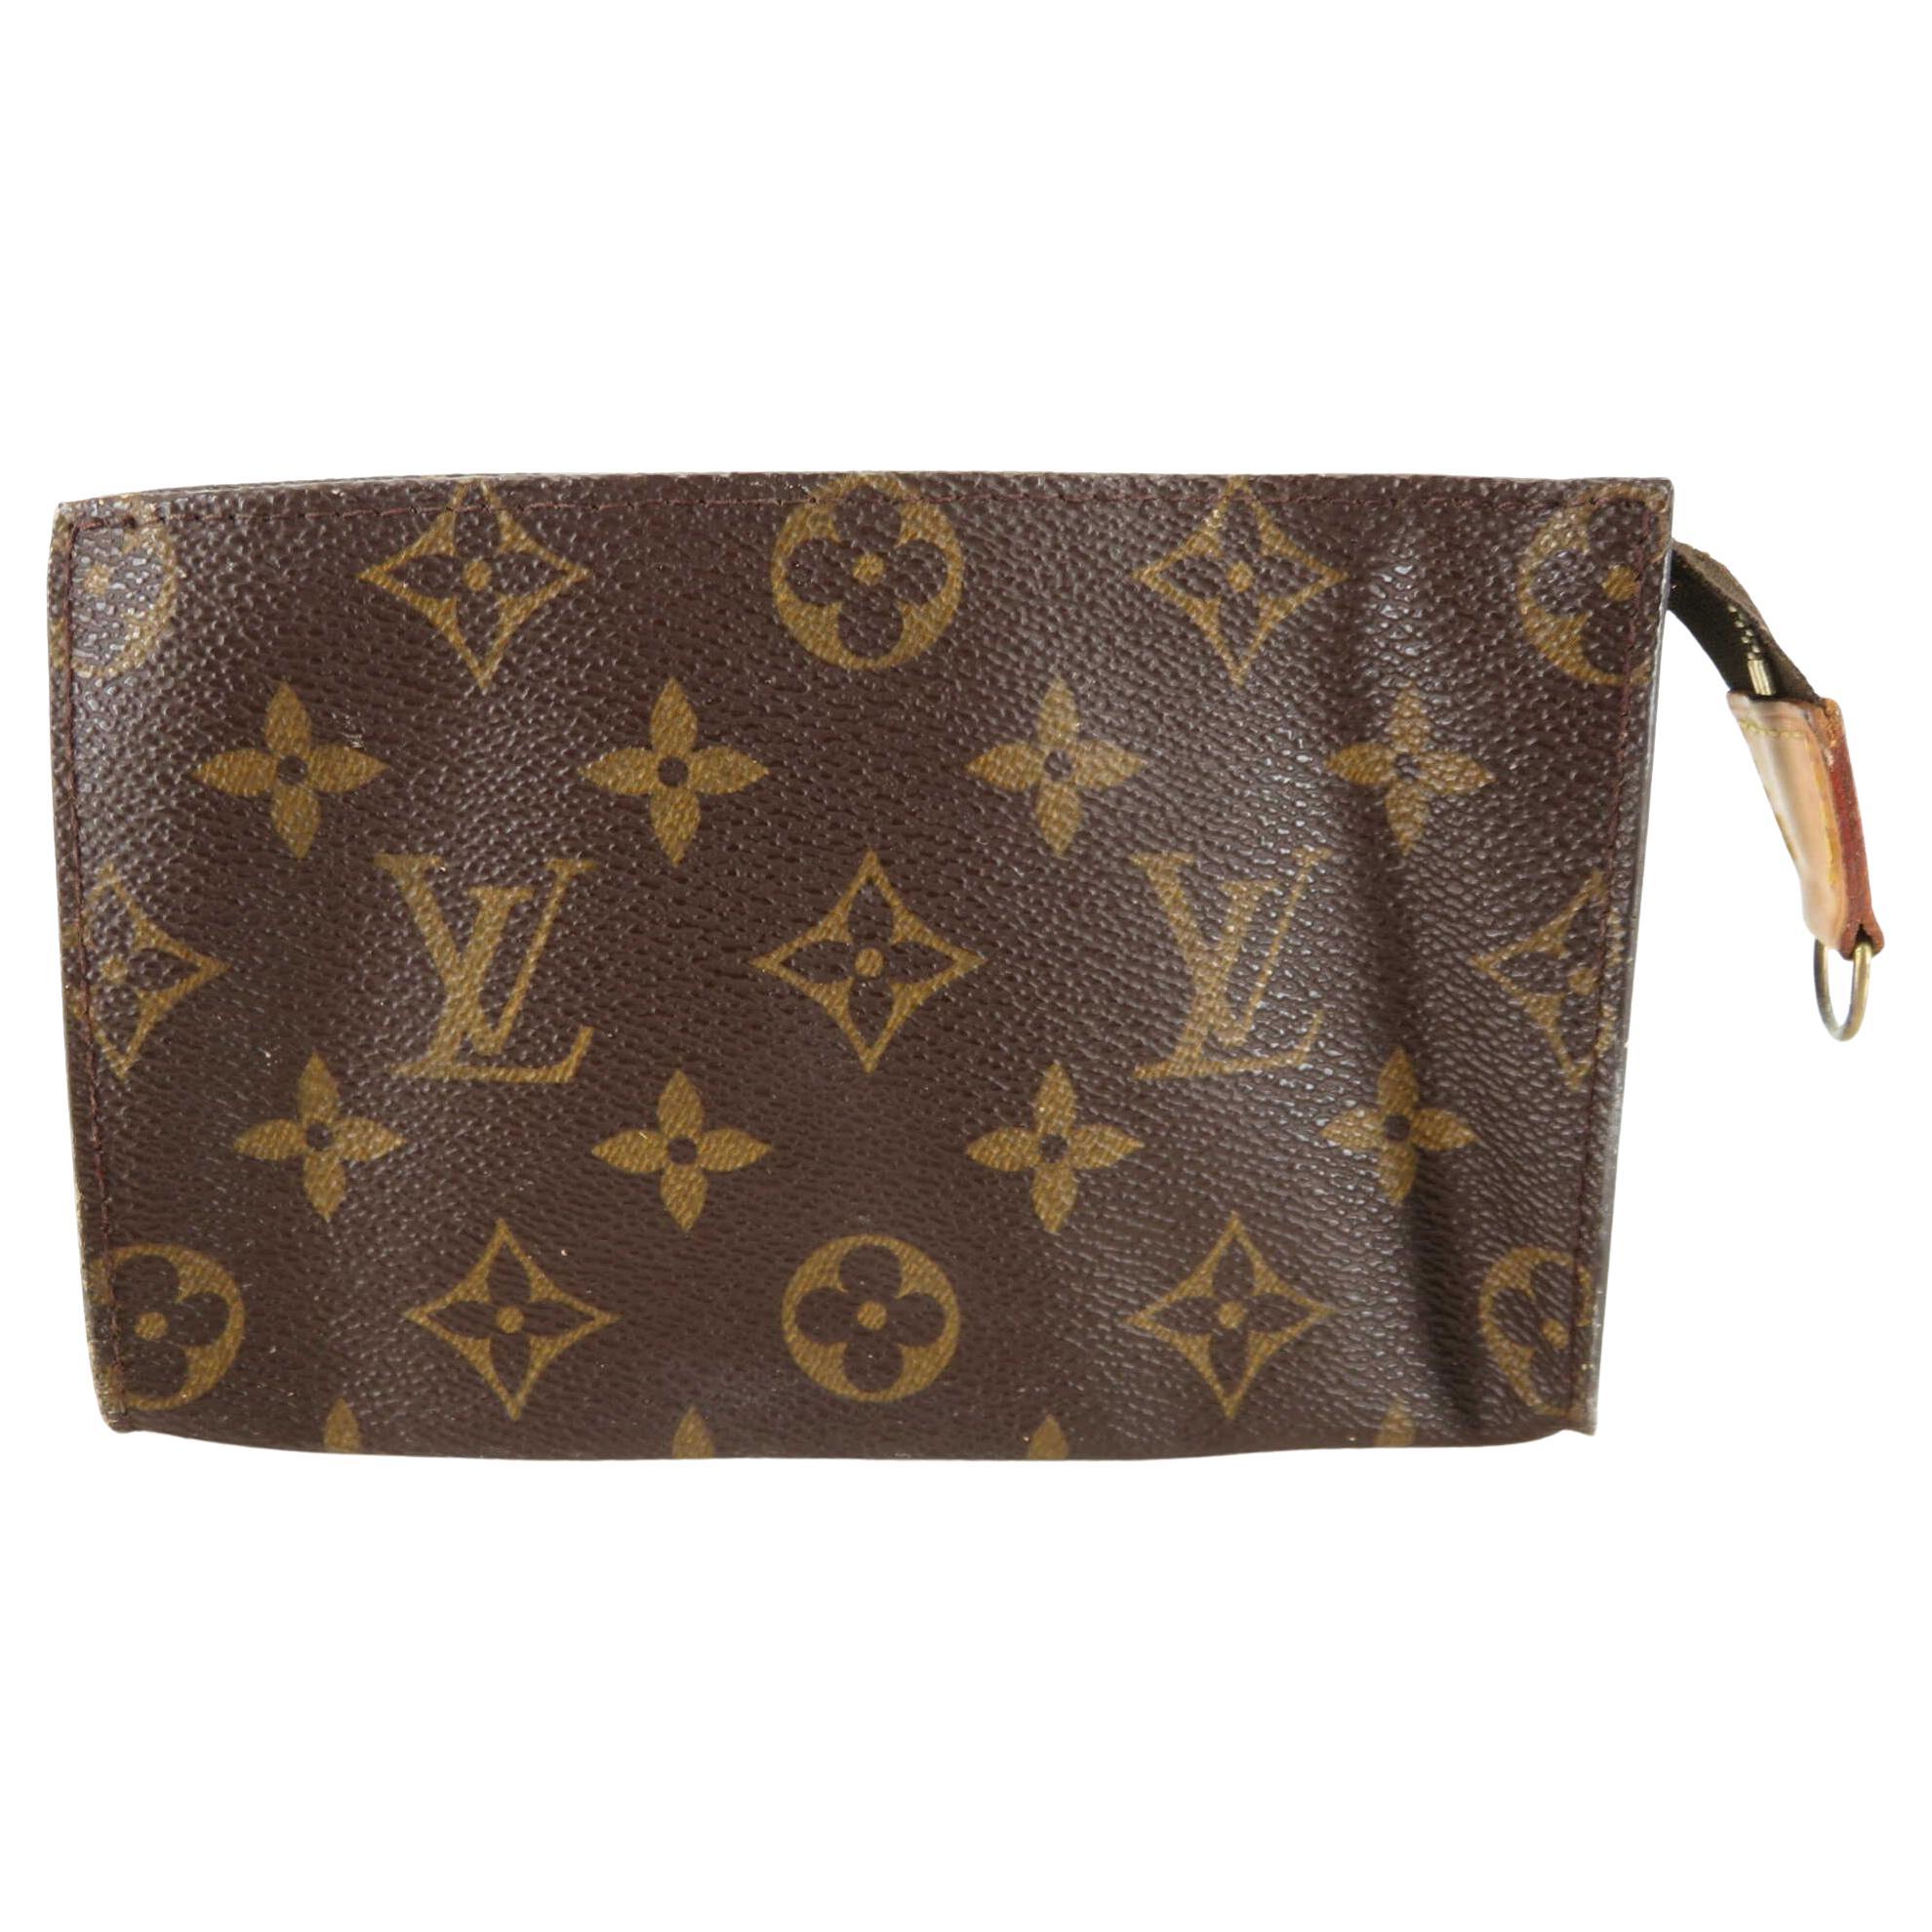 Brown and tan monogram coated canvas Louis Vuitton Toiletry Pouch